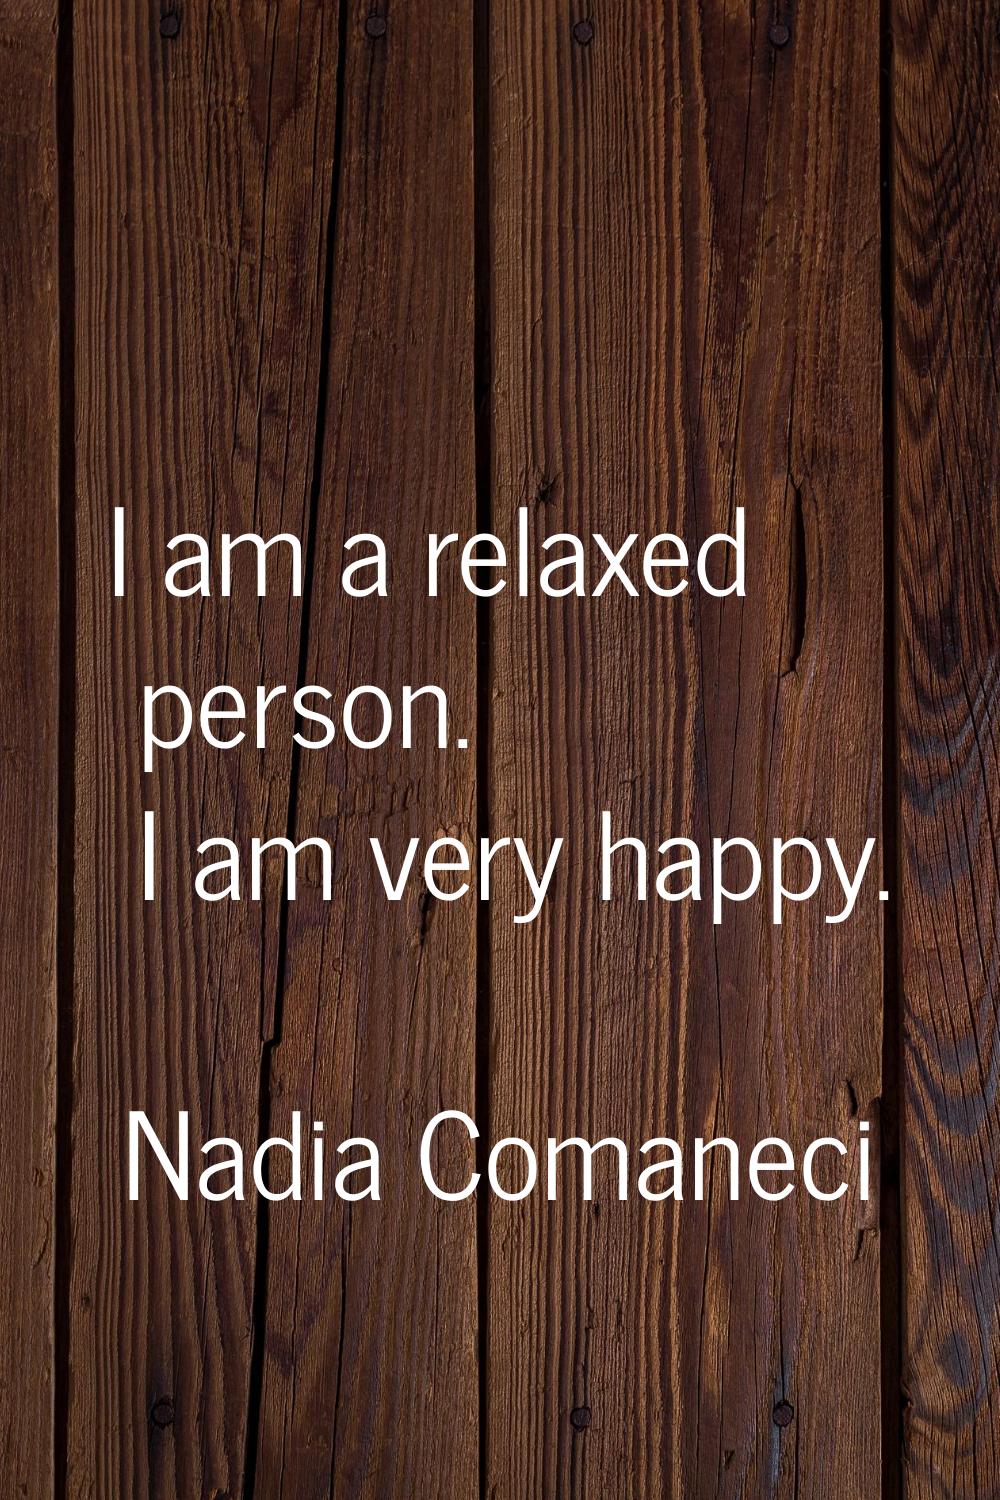 I am a relaxed person. I am very happy.